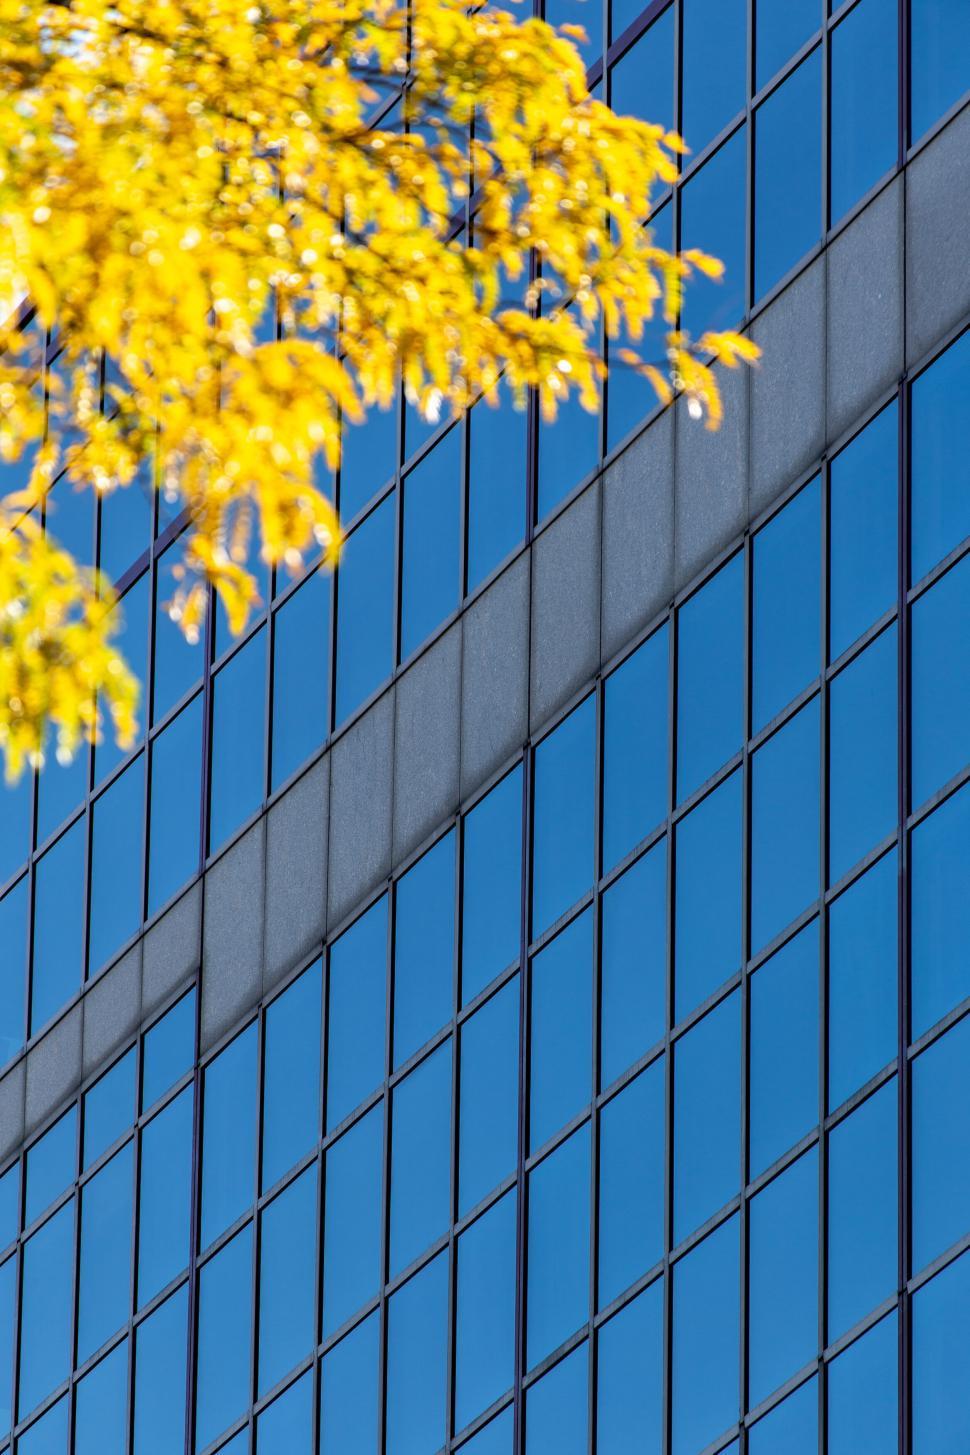 Free Image of Blue reflective glass building with autumn leaves 